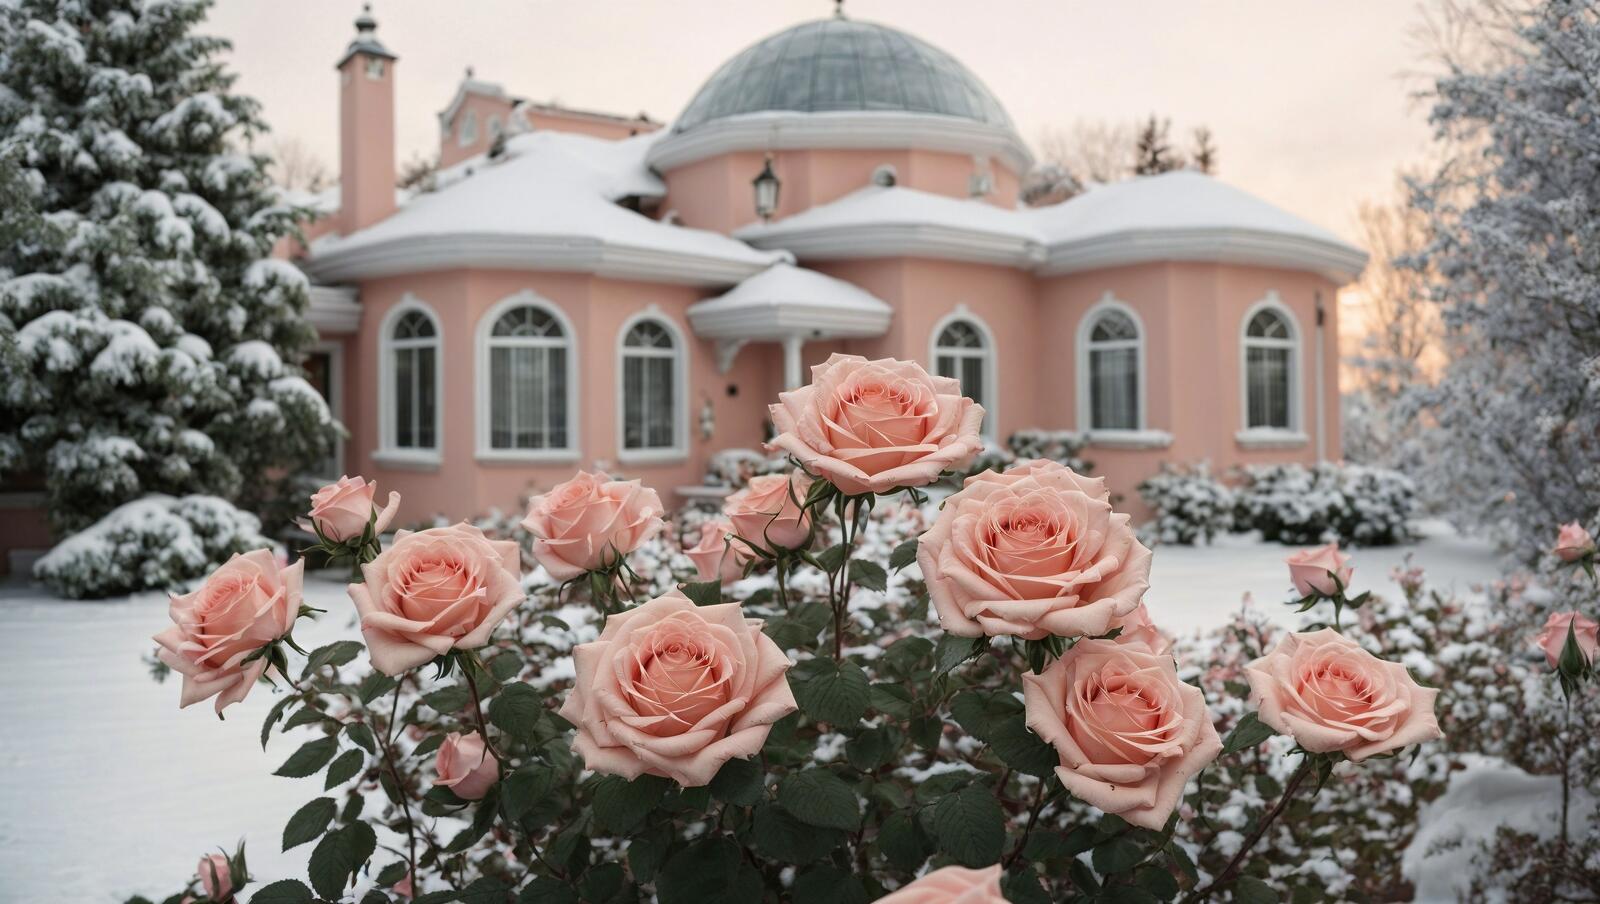 Free photo Rose bush in front of the pink house in the snow